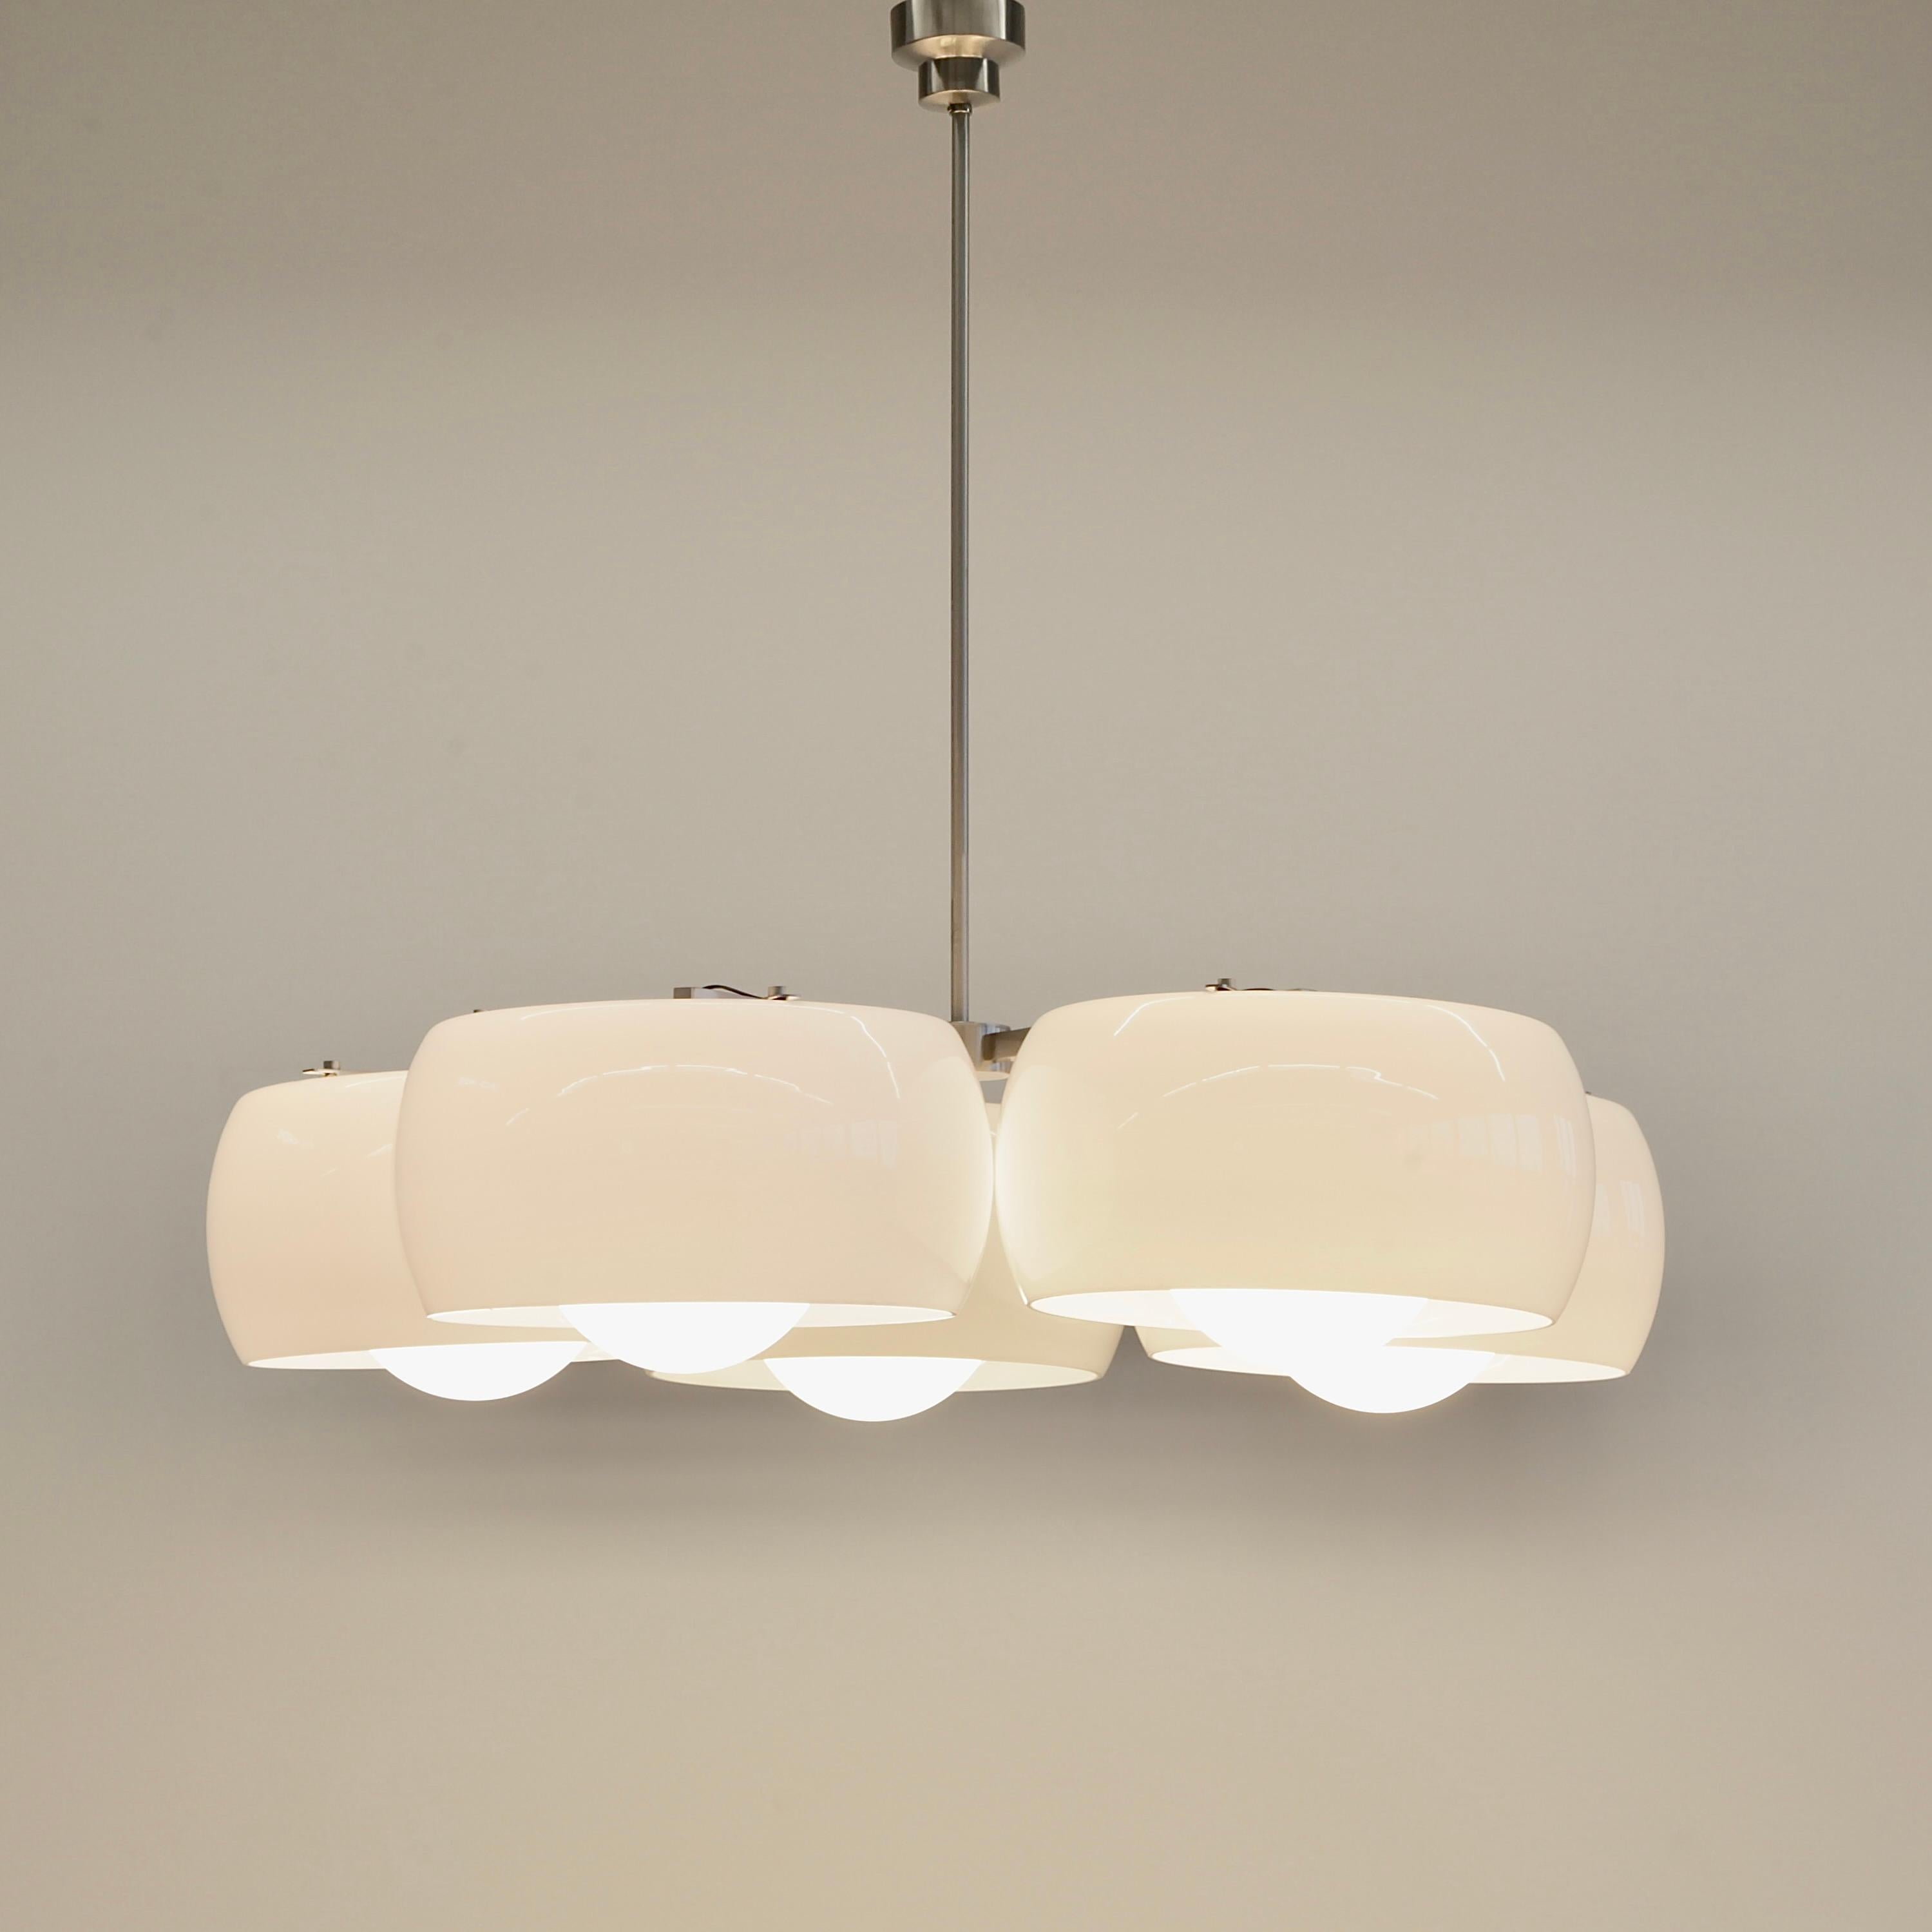 Glass Large Ceiling Lamp Pentaclinio Designed by Vico Magistretti for Artemide, 1961